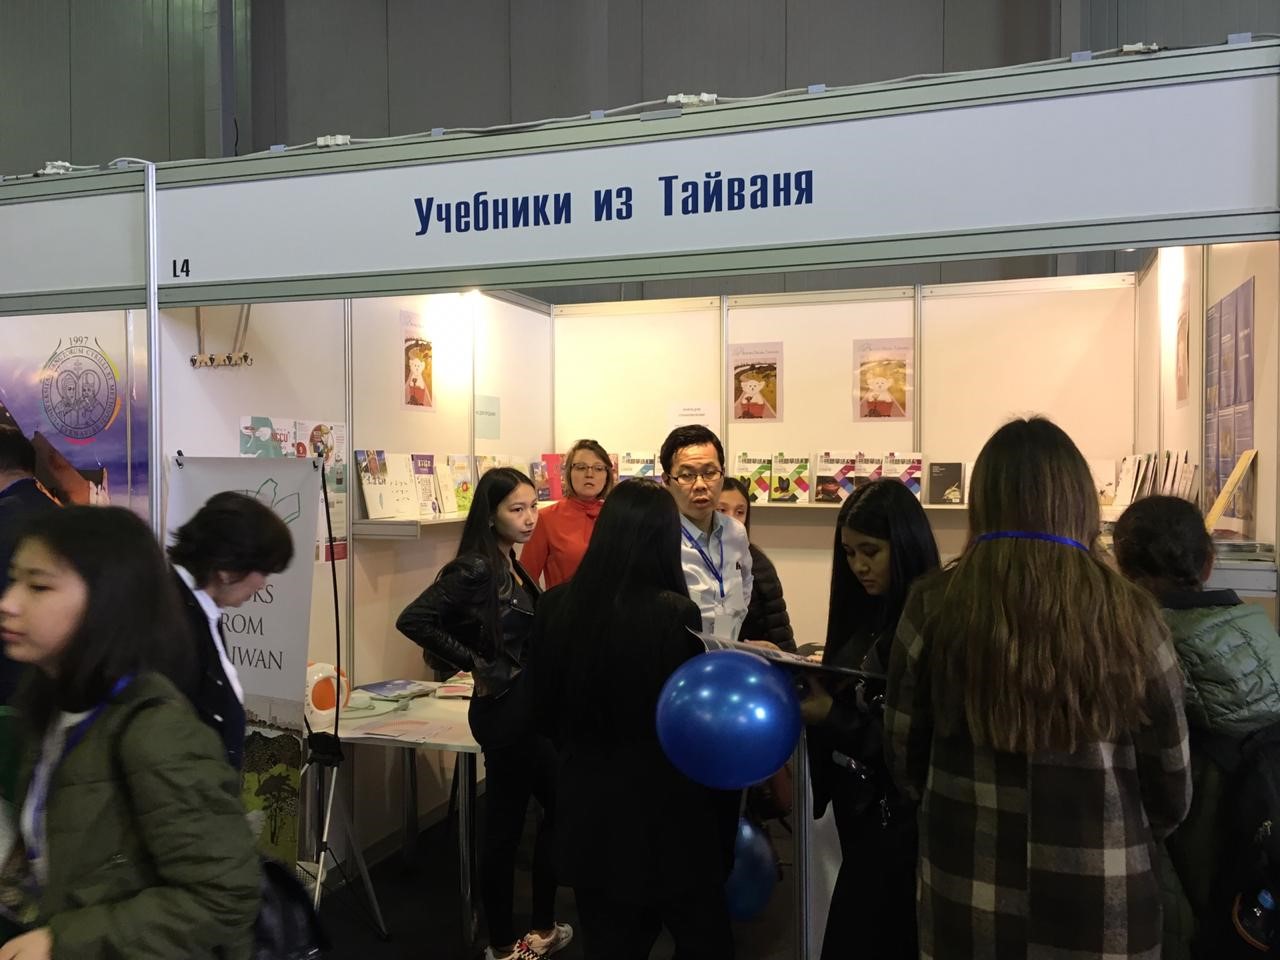 The Education Division of the Taipei-Moscow Economic and Cultural Coordination Commission Participates in the “Education and Career” International Education and Book Exhibition in Almaty, Kazakhstan